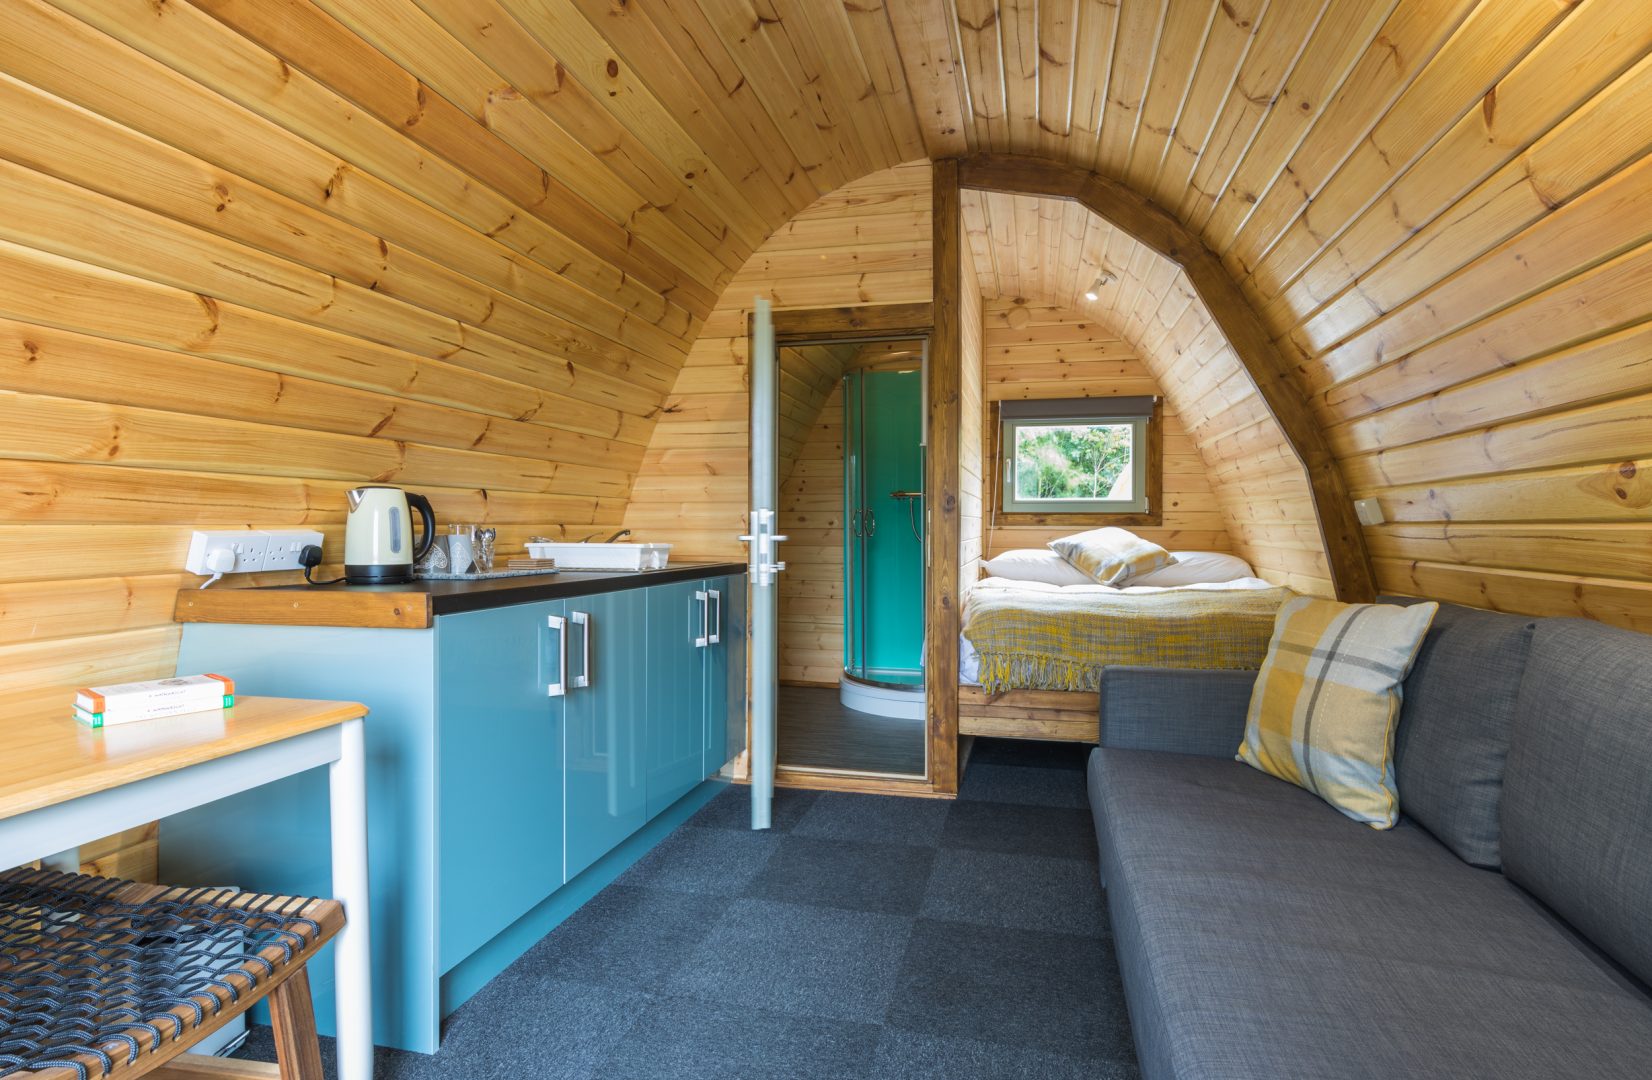 Woolpack Farm Luxury Glamping Pods & Lodges